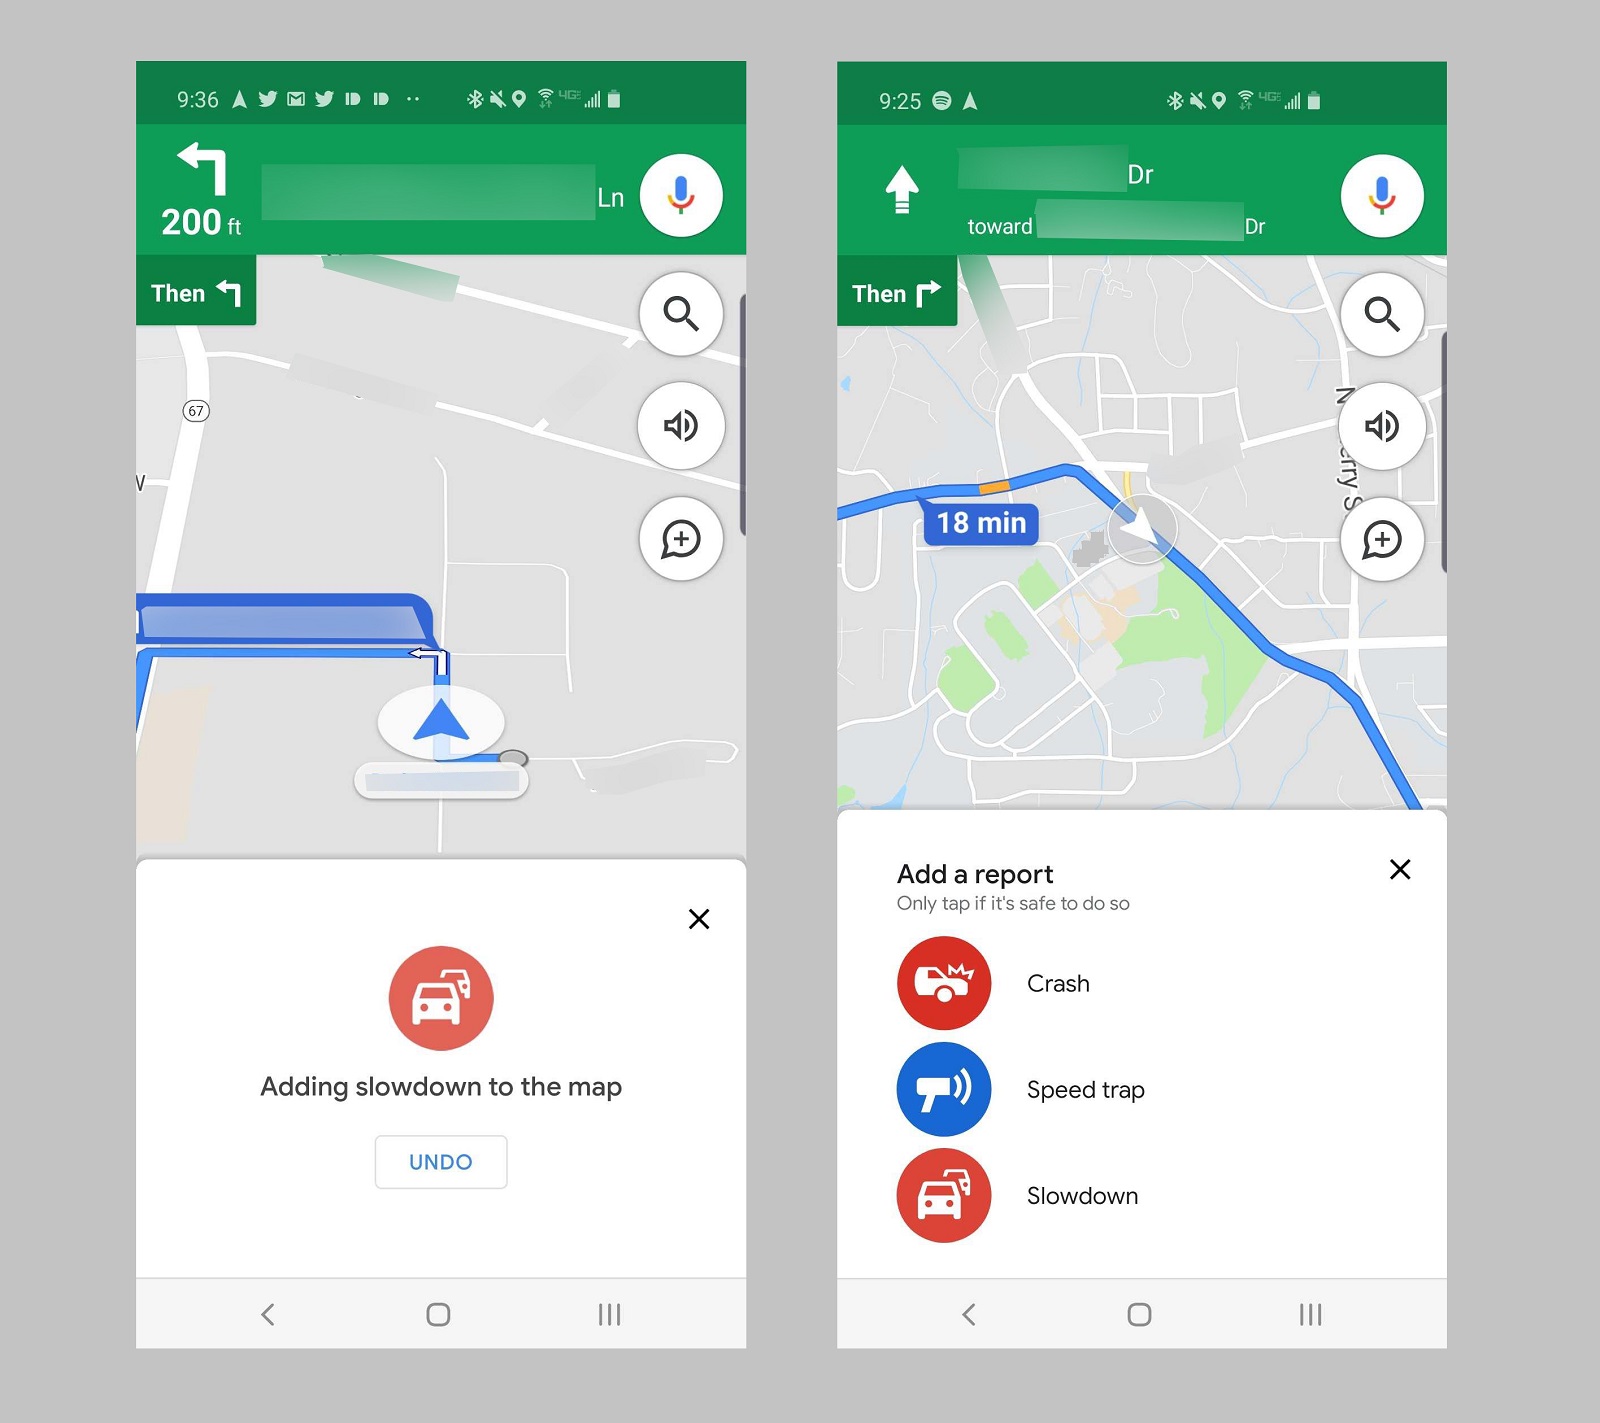 google-maps-incident-reporting-adds-slowdown-option-for-traffic-jams